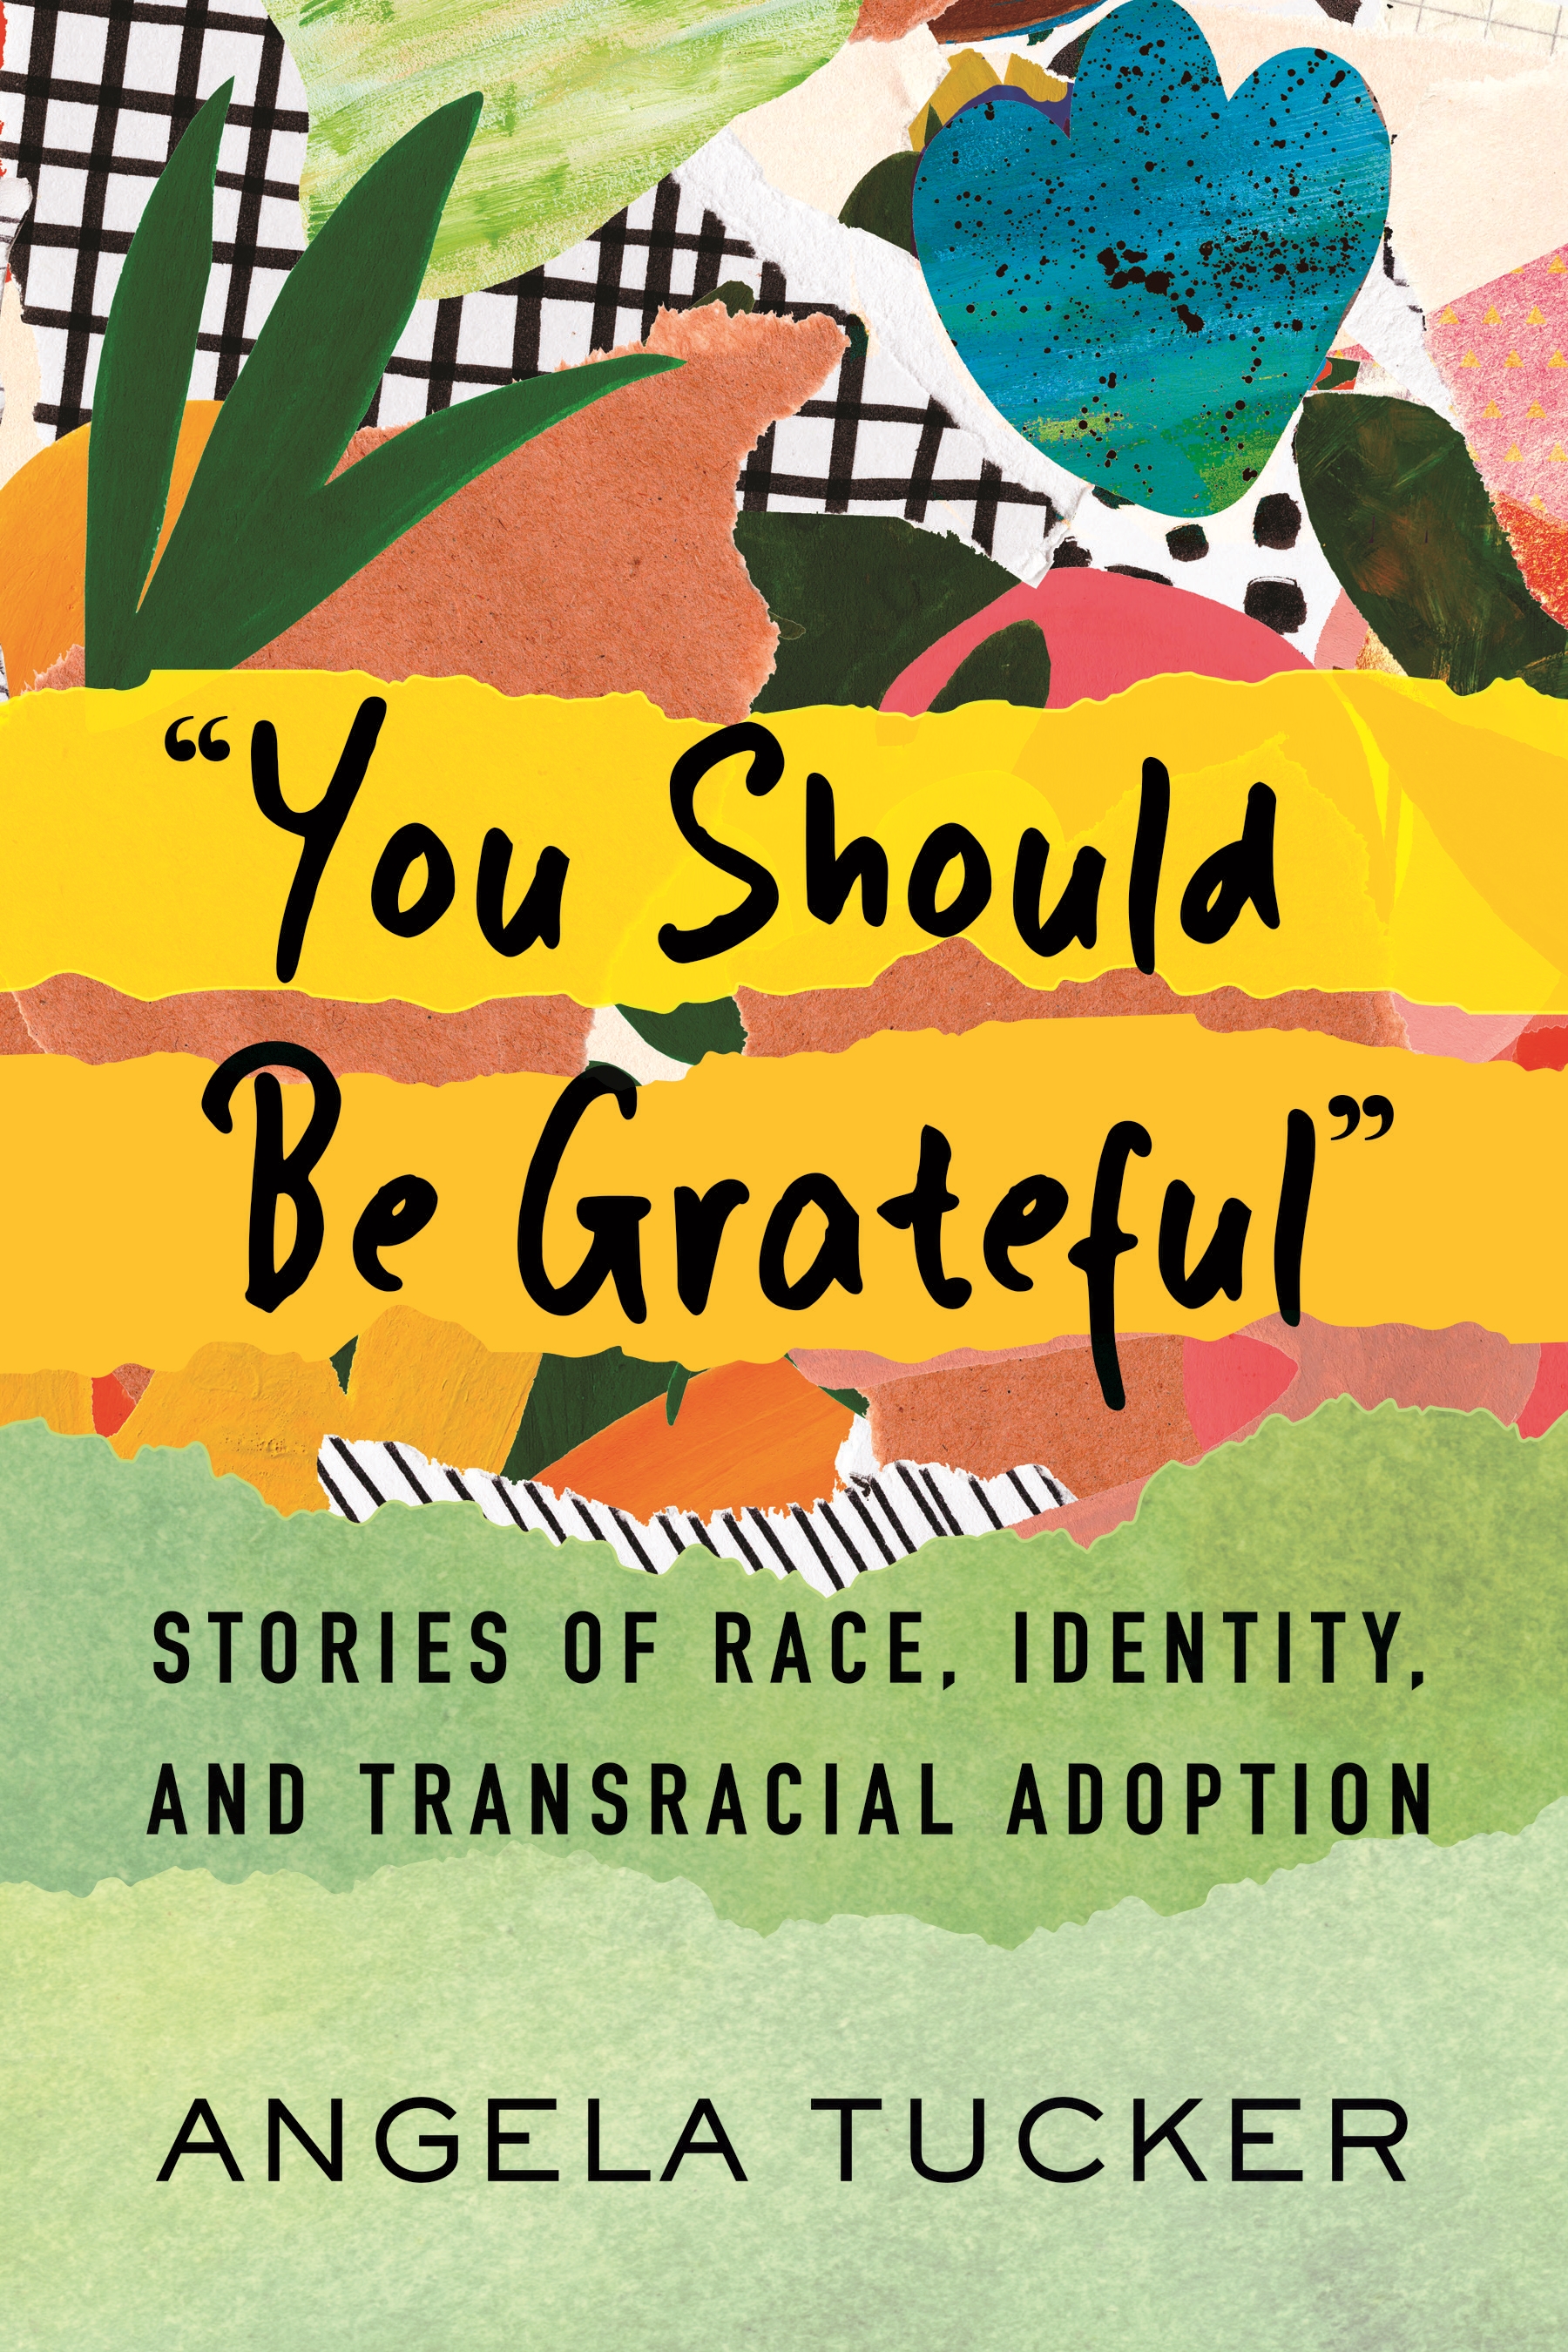 Book cover: "You Should Be Grateful": Stories of Race, Identity, and Transracial Adoption